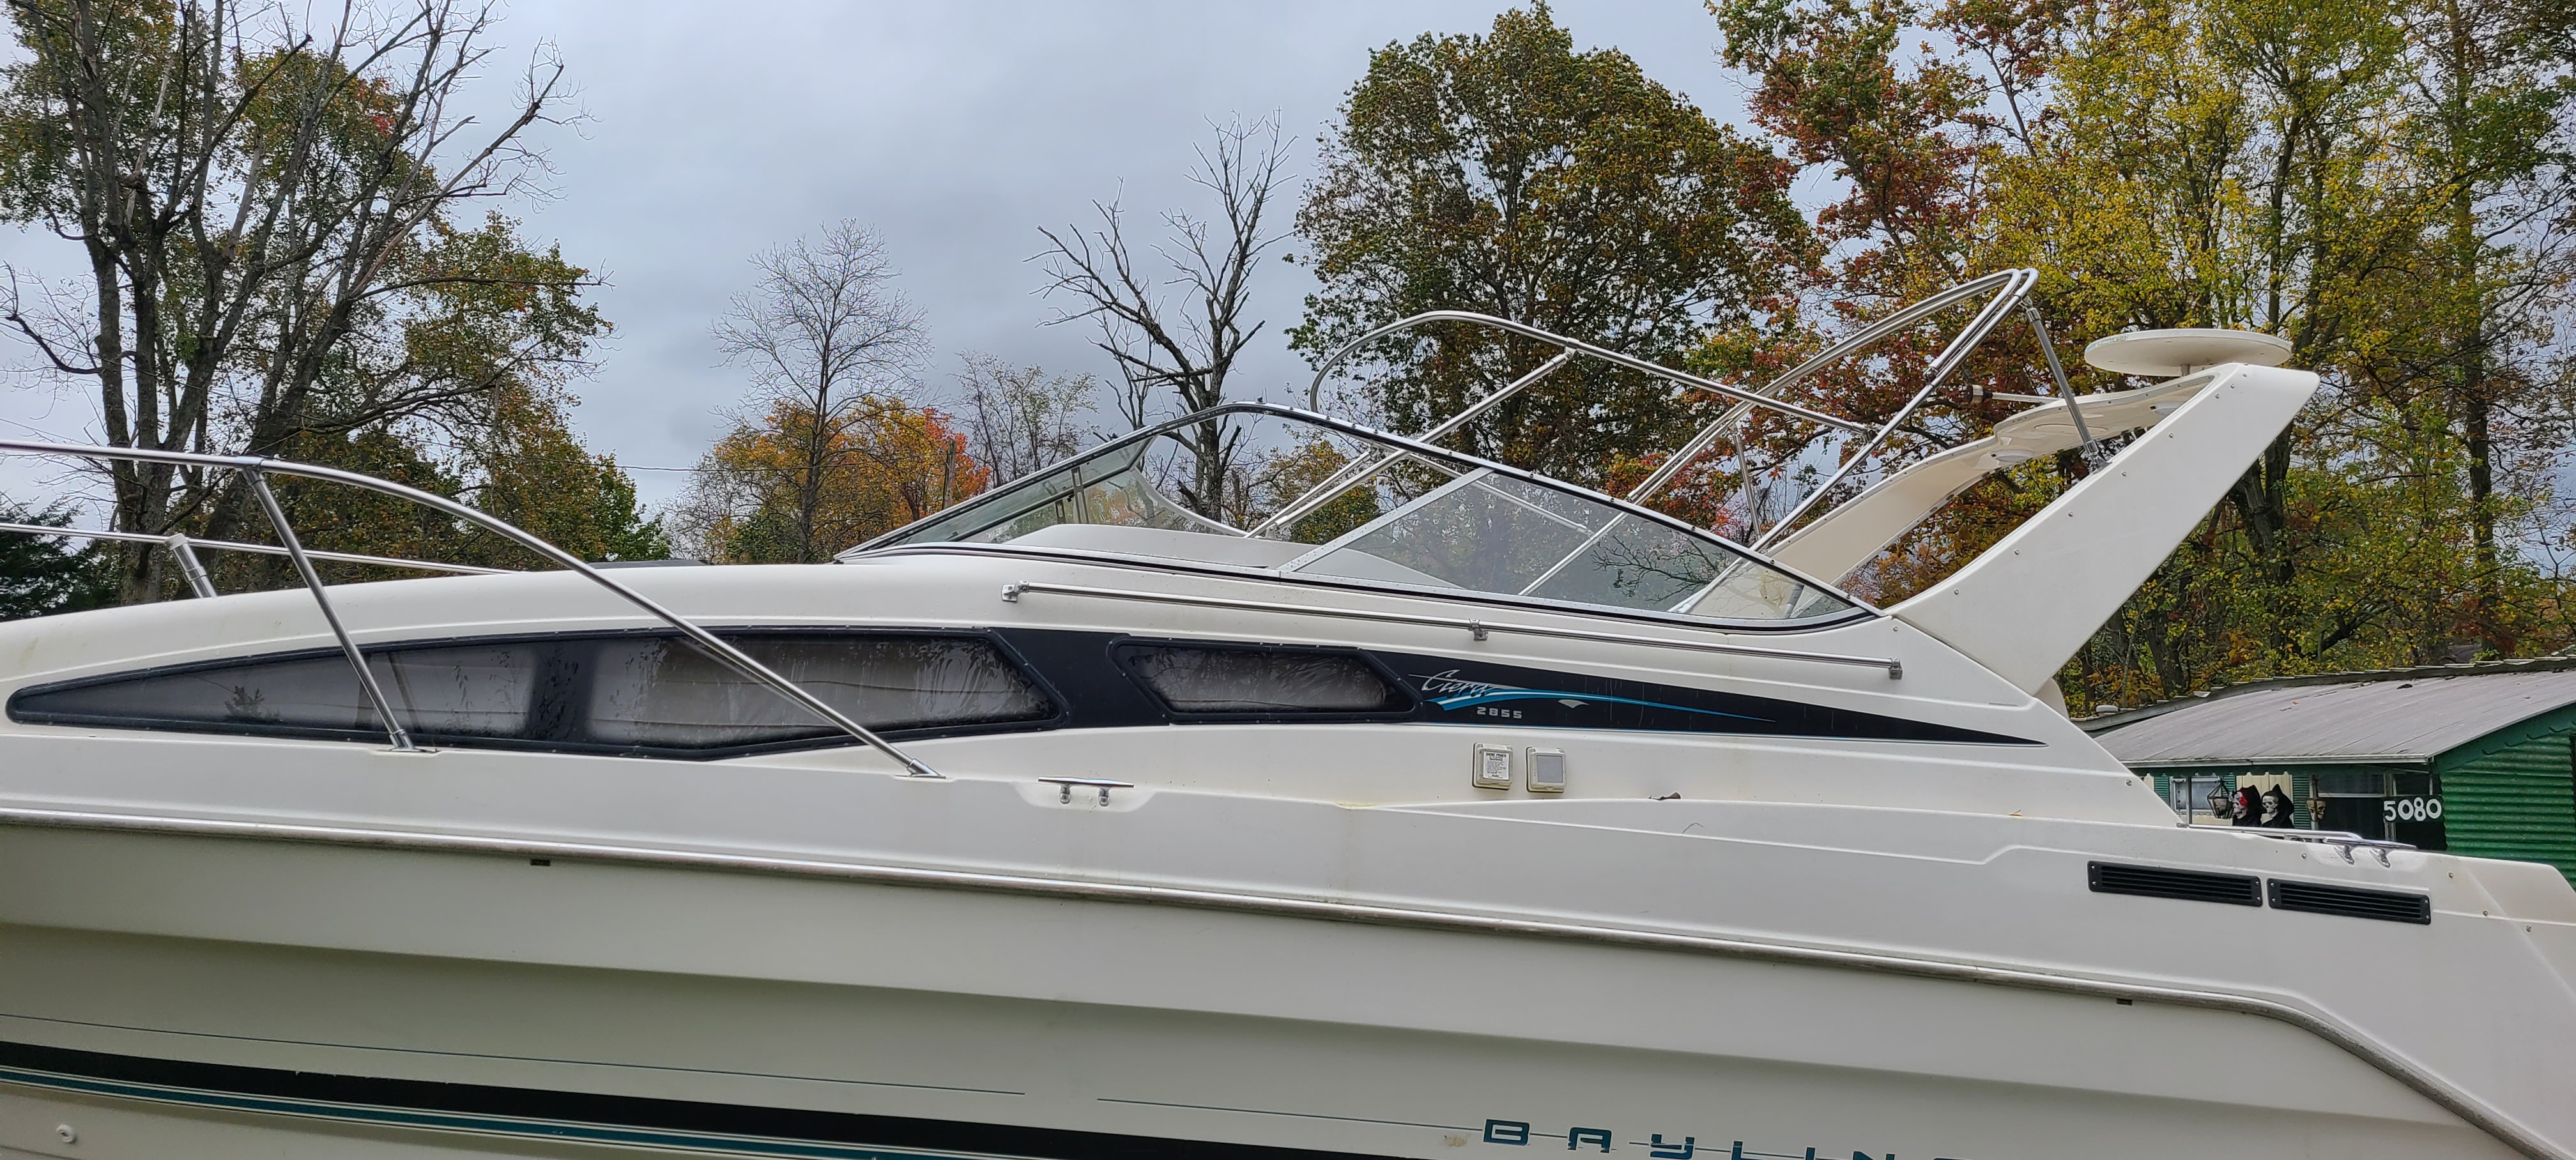 1995 Bayliner Ciera 2855 Power boat for sale in Hallam, PA - image 4 